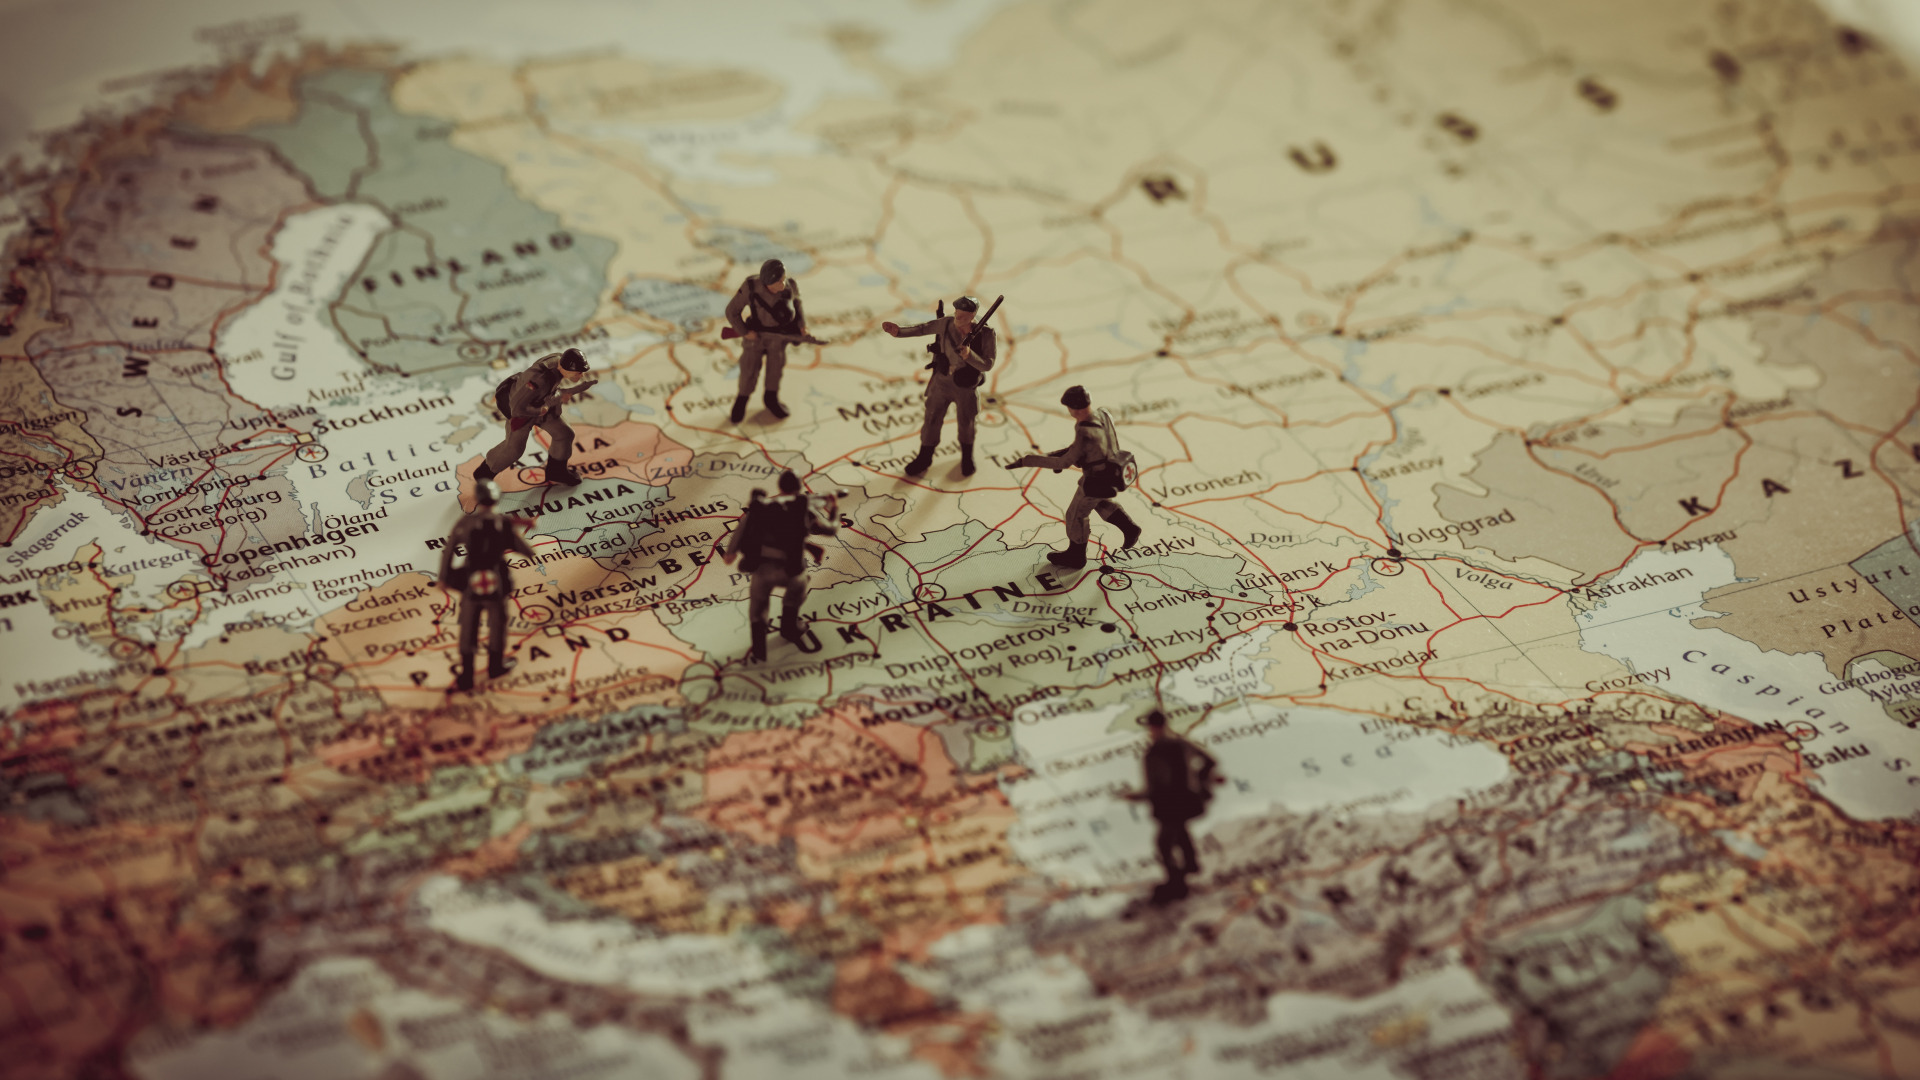 General 1920x1080 globes continents map countries miniatures soldier figurines toys depth of field closeup Europe Poland Lithuania Ukraine Russia Turkey World War II beige